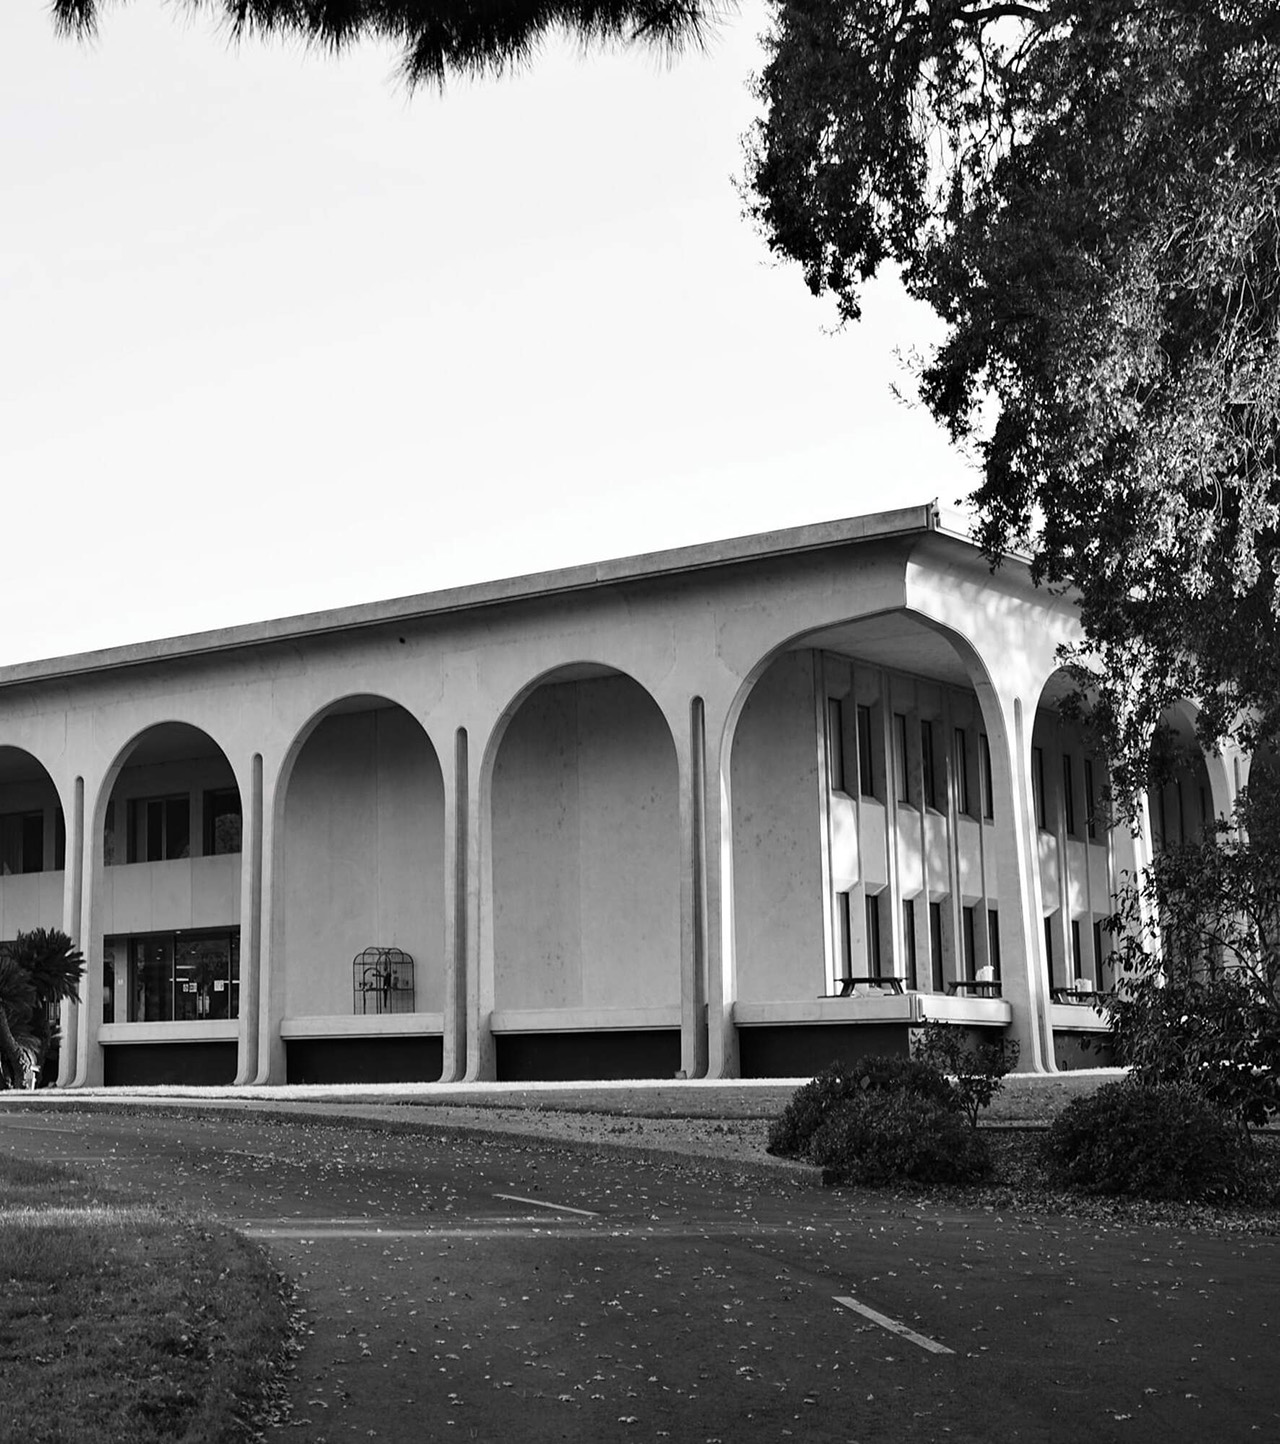 Black and white image of a building.